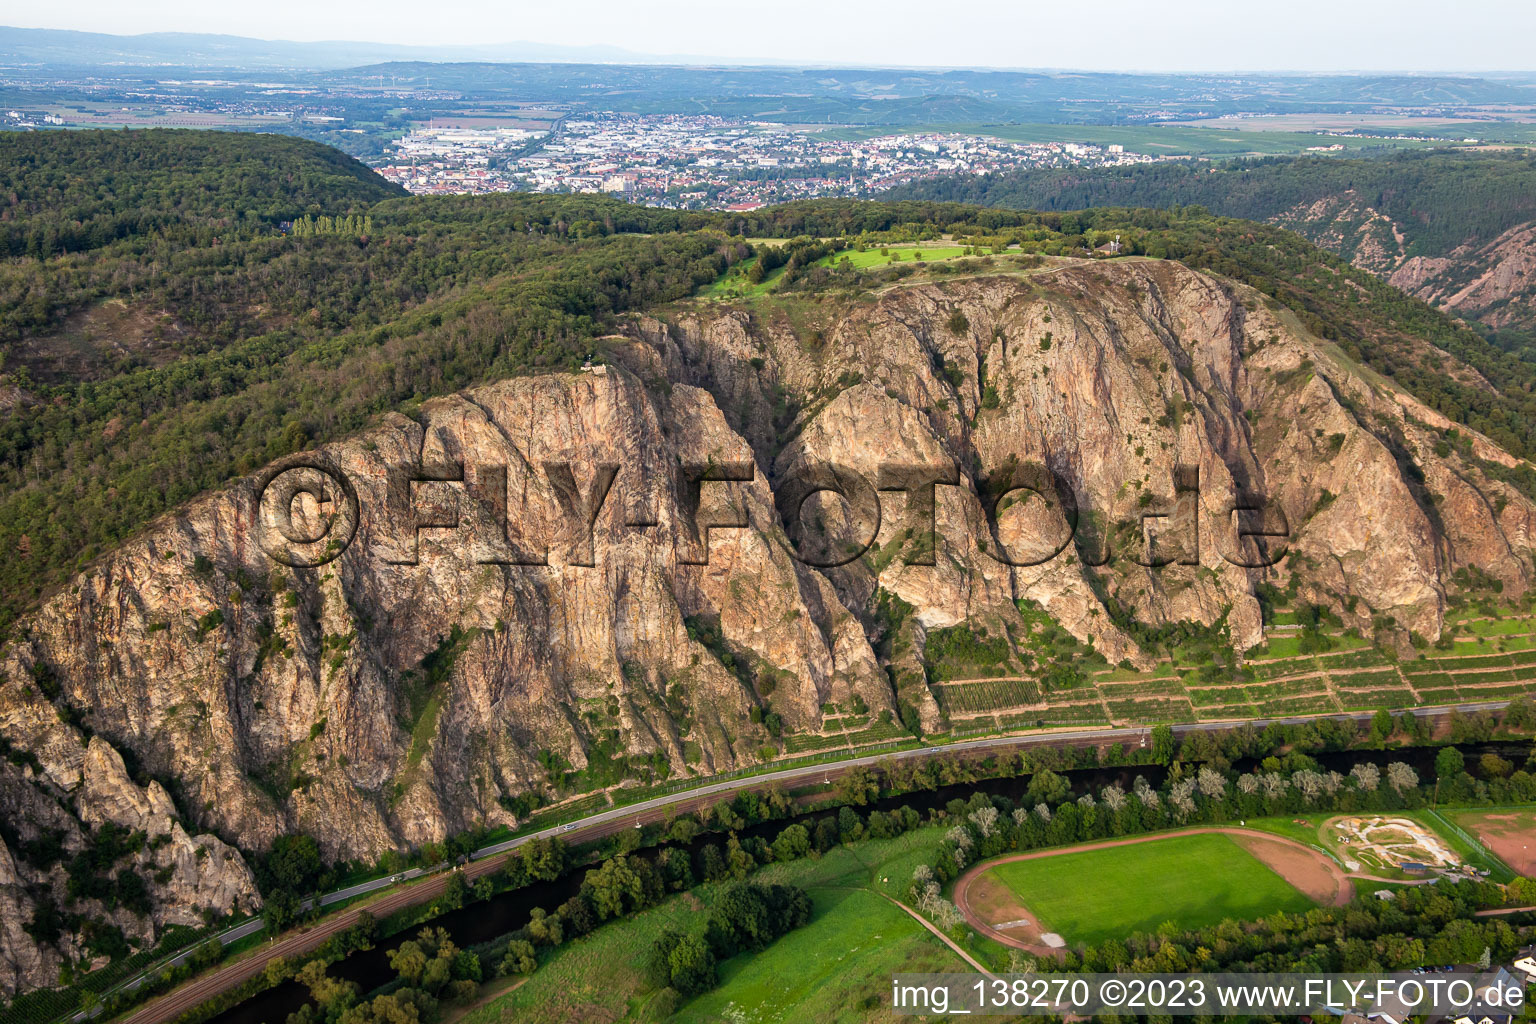 Aerial photograpy of The Rotenfels is the highest steep face between Norway and the Alps in Traisen in the state Rhineland-Palatinate, Germany